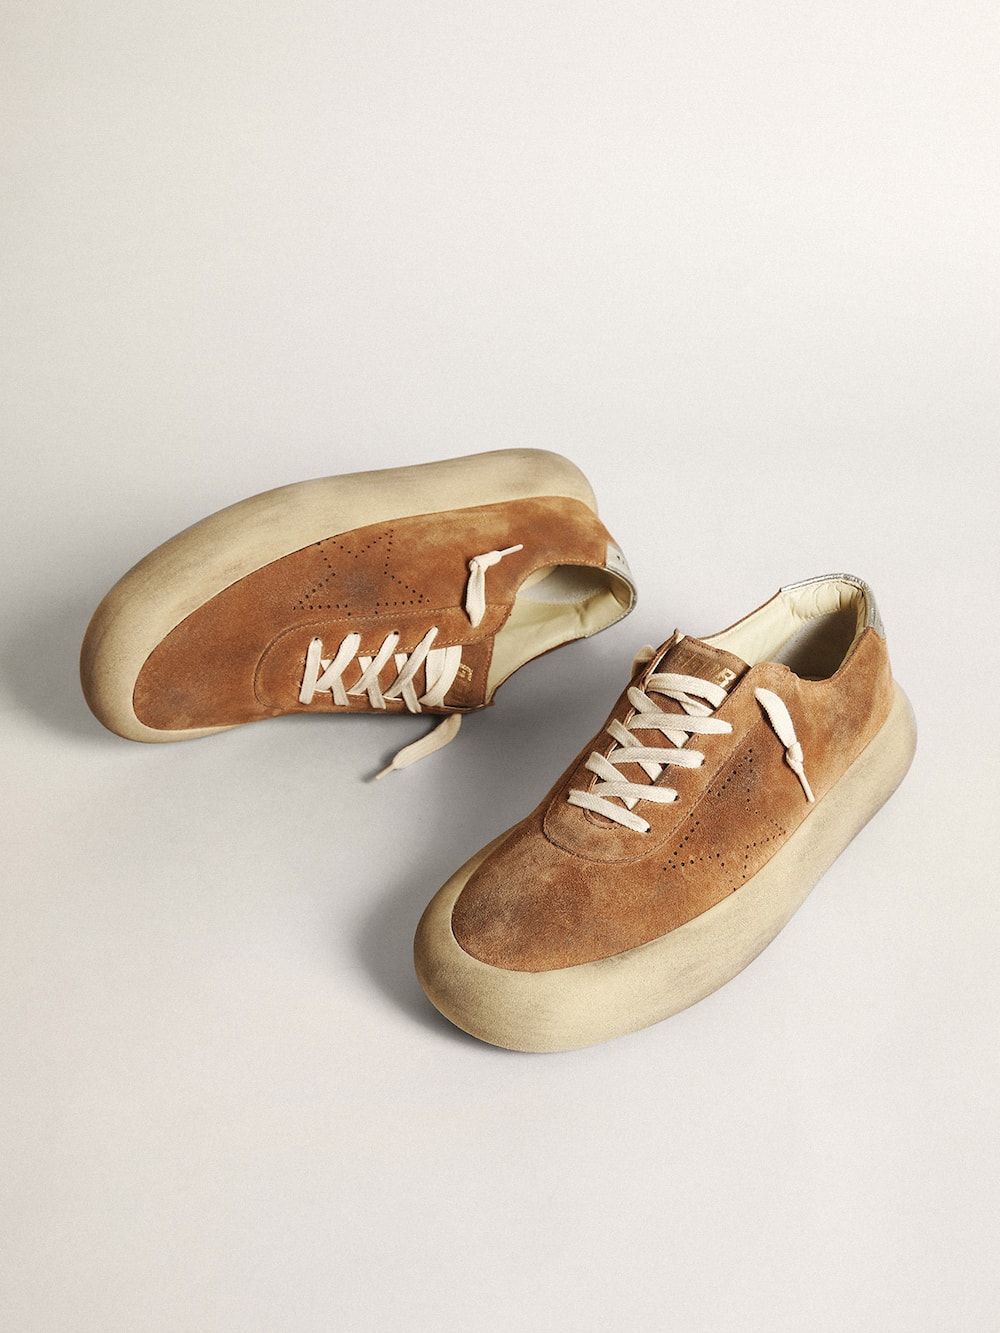 Golden Goose - Chaussures Space-Star homme en daim couleur tabac in 